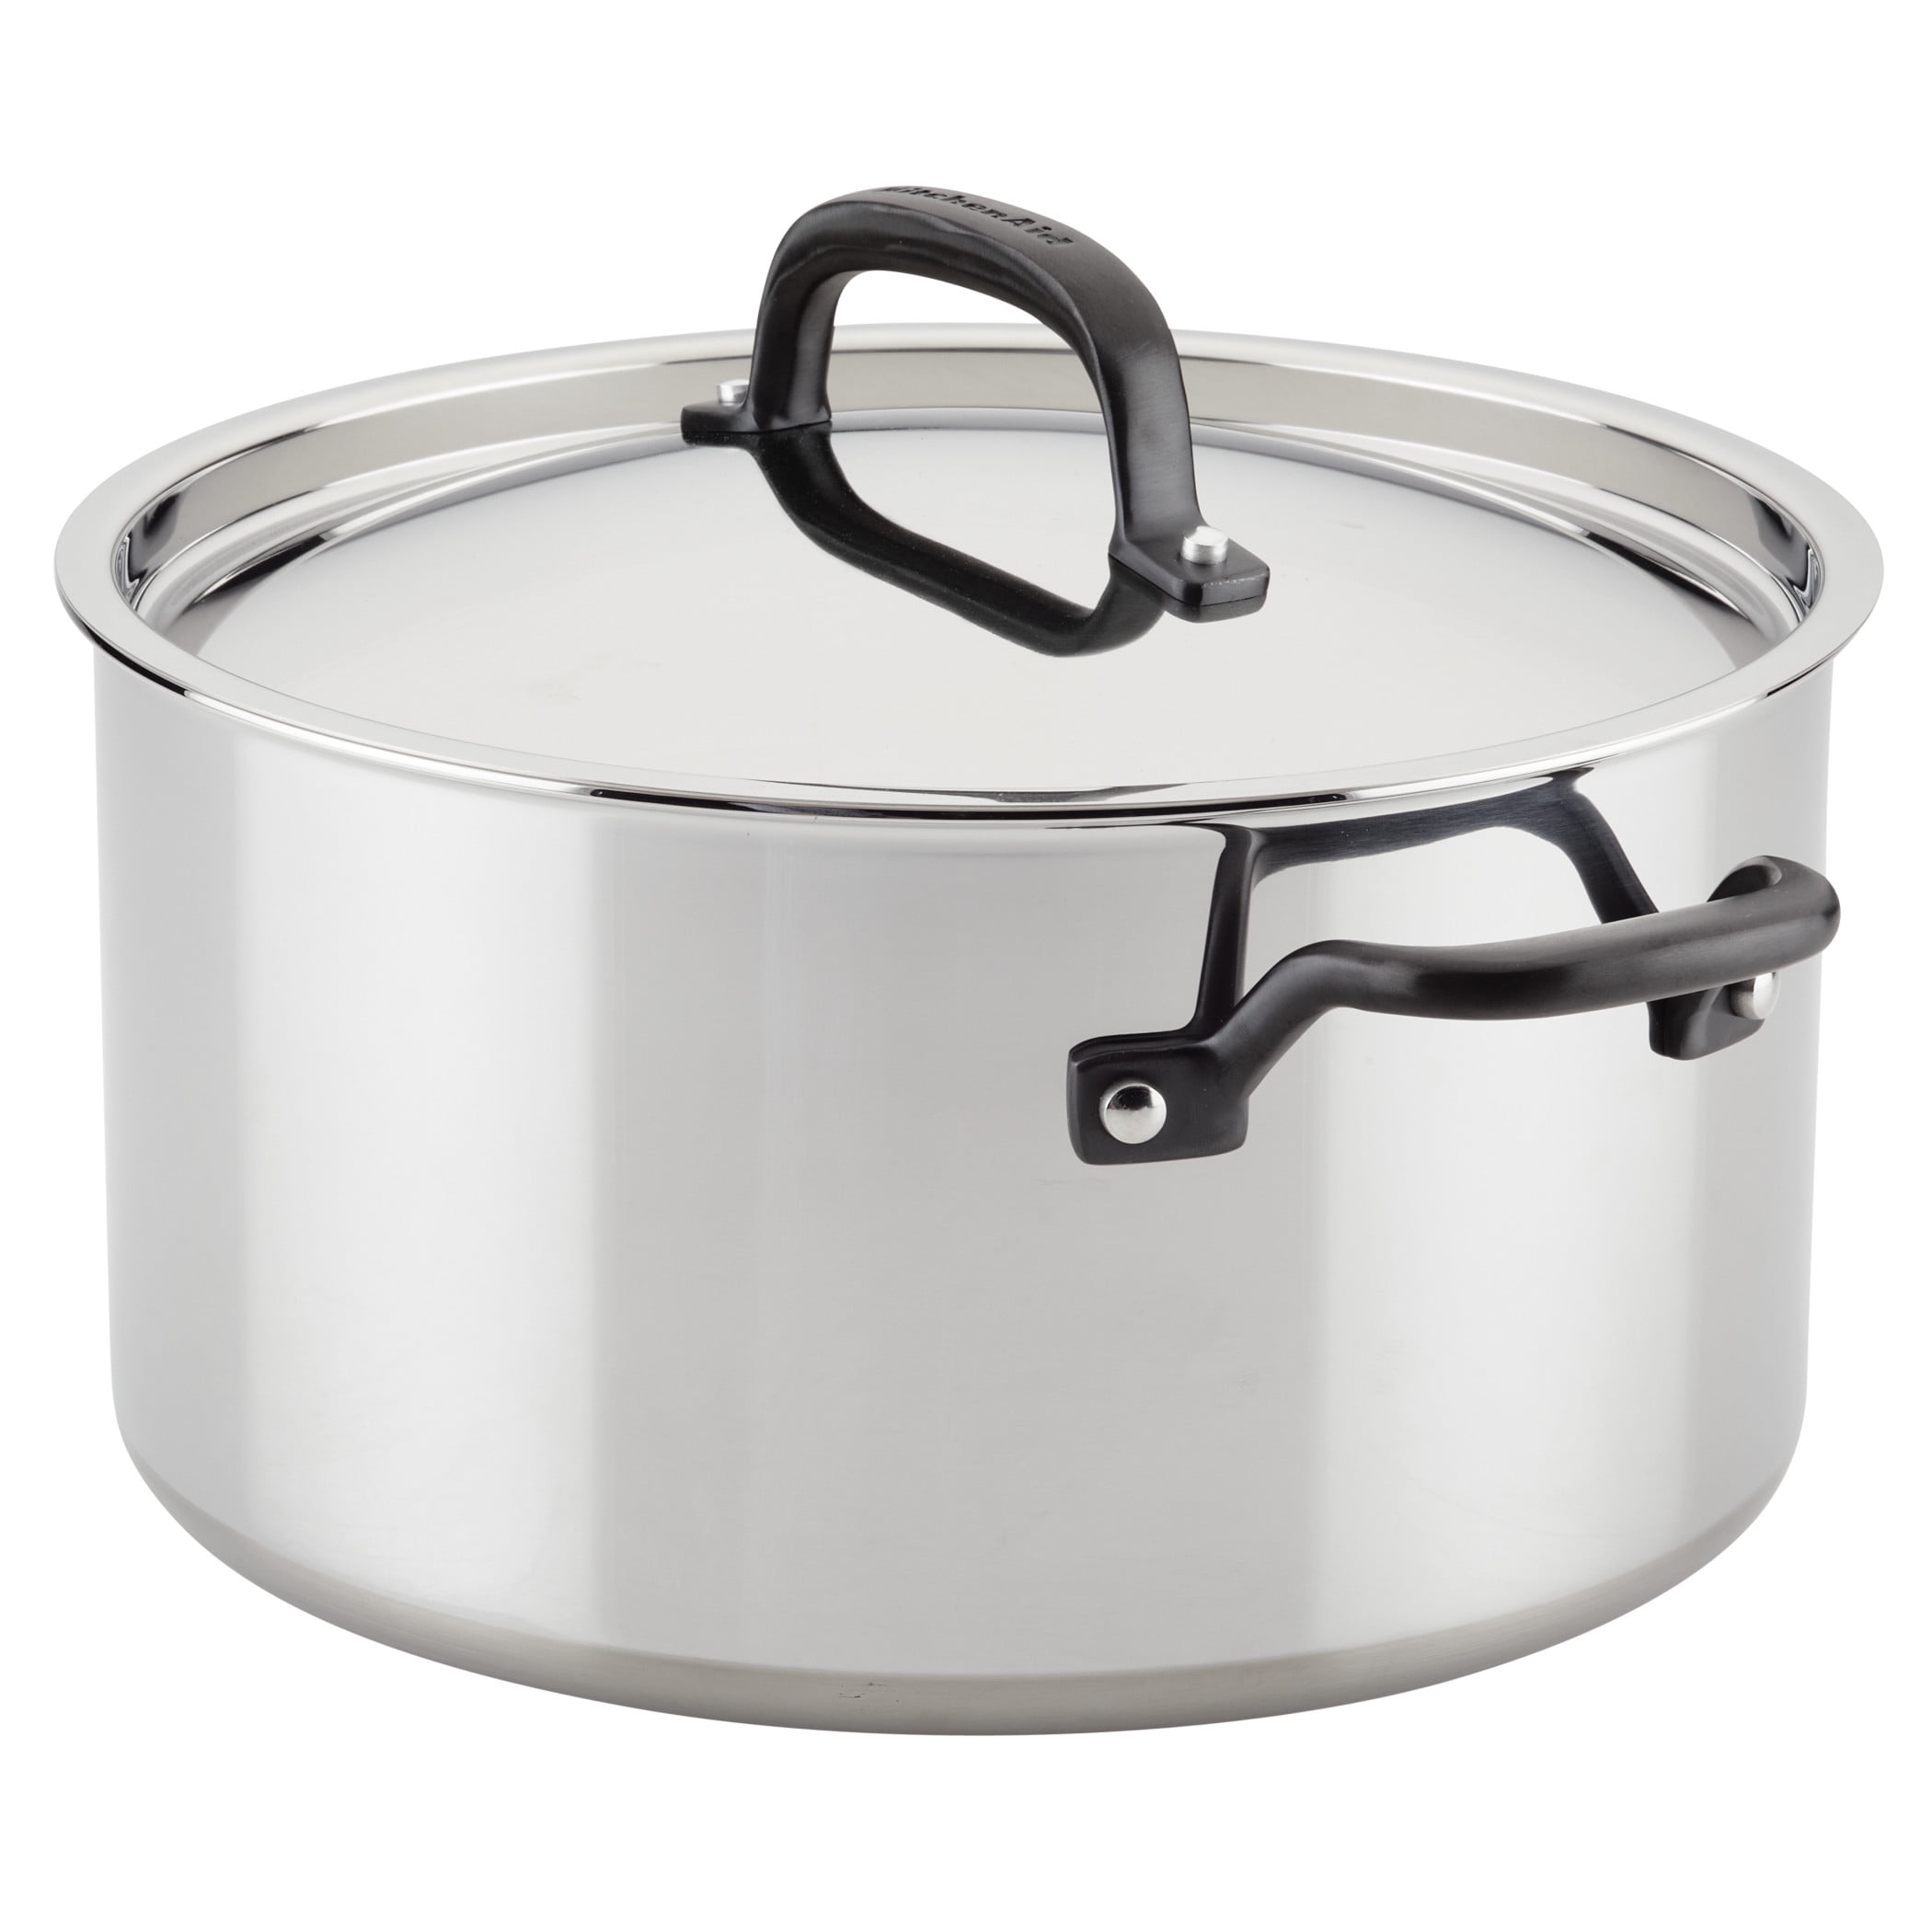 KitchenAid 10-Piece 5-Ply Clad Stainless Steel Cookware Set + Reviews, Crate & Barrel